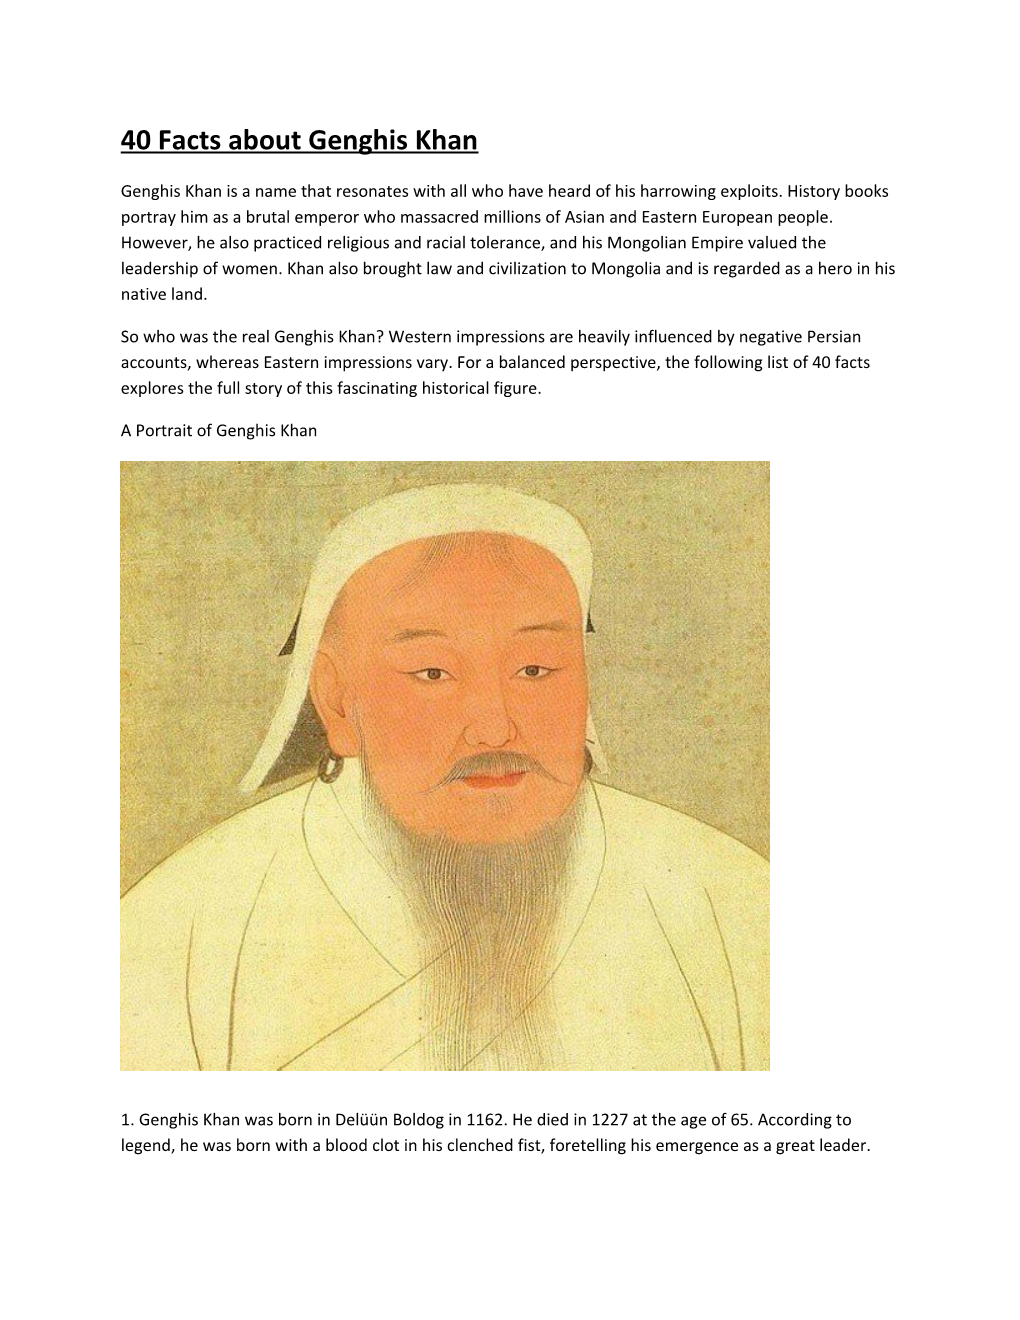 40 Facts About Genghis Khan